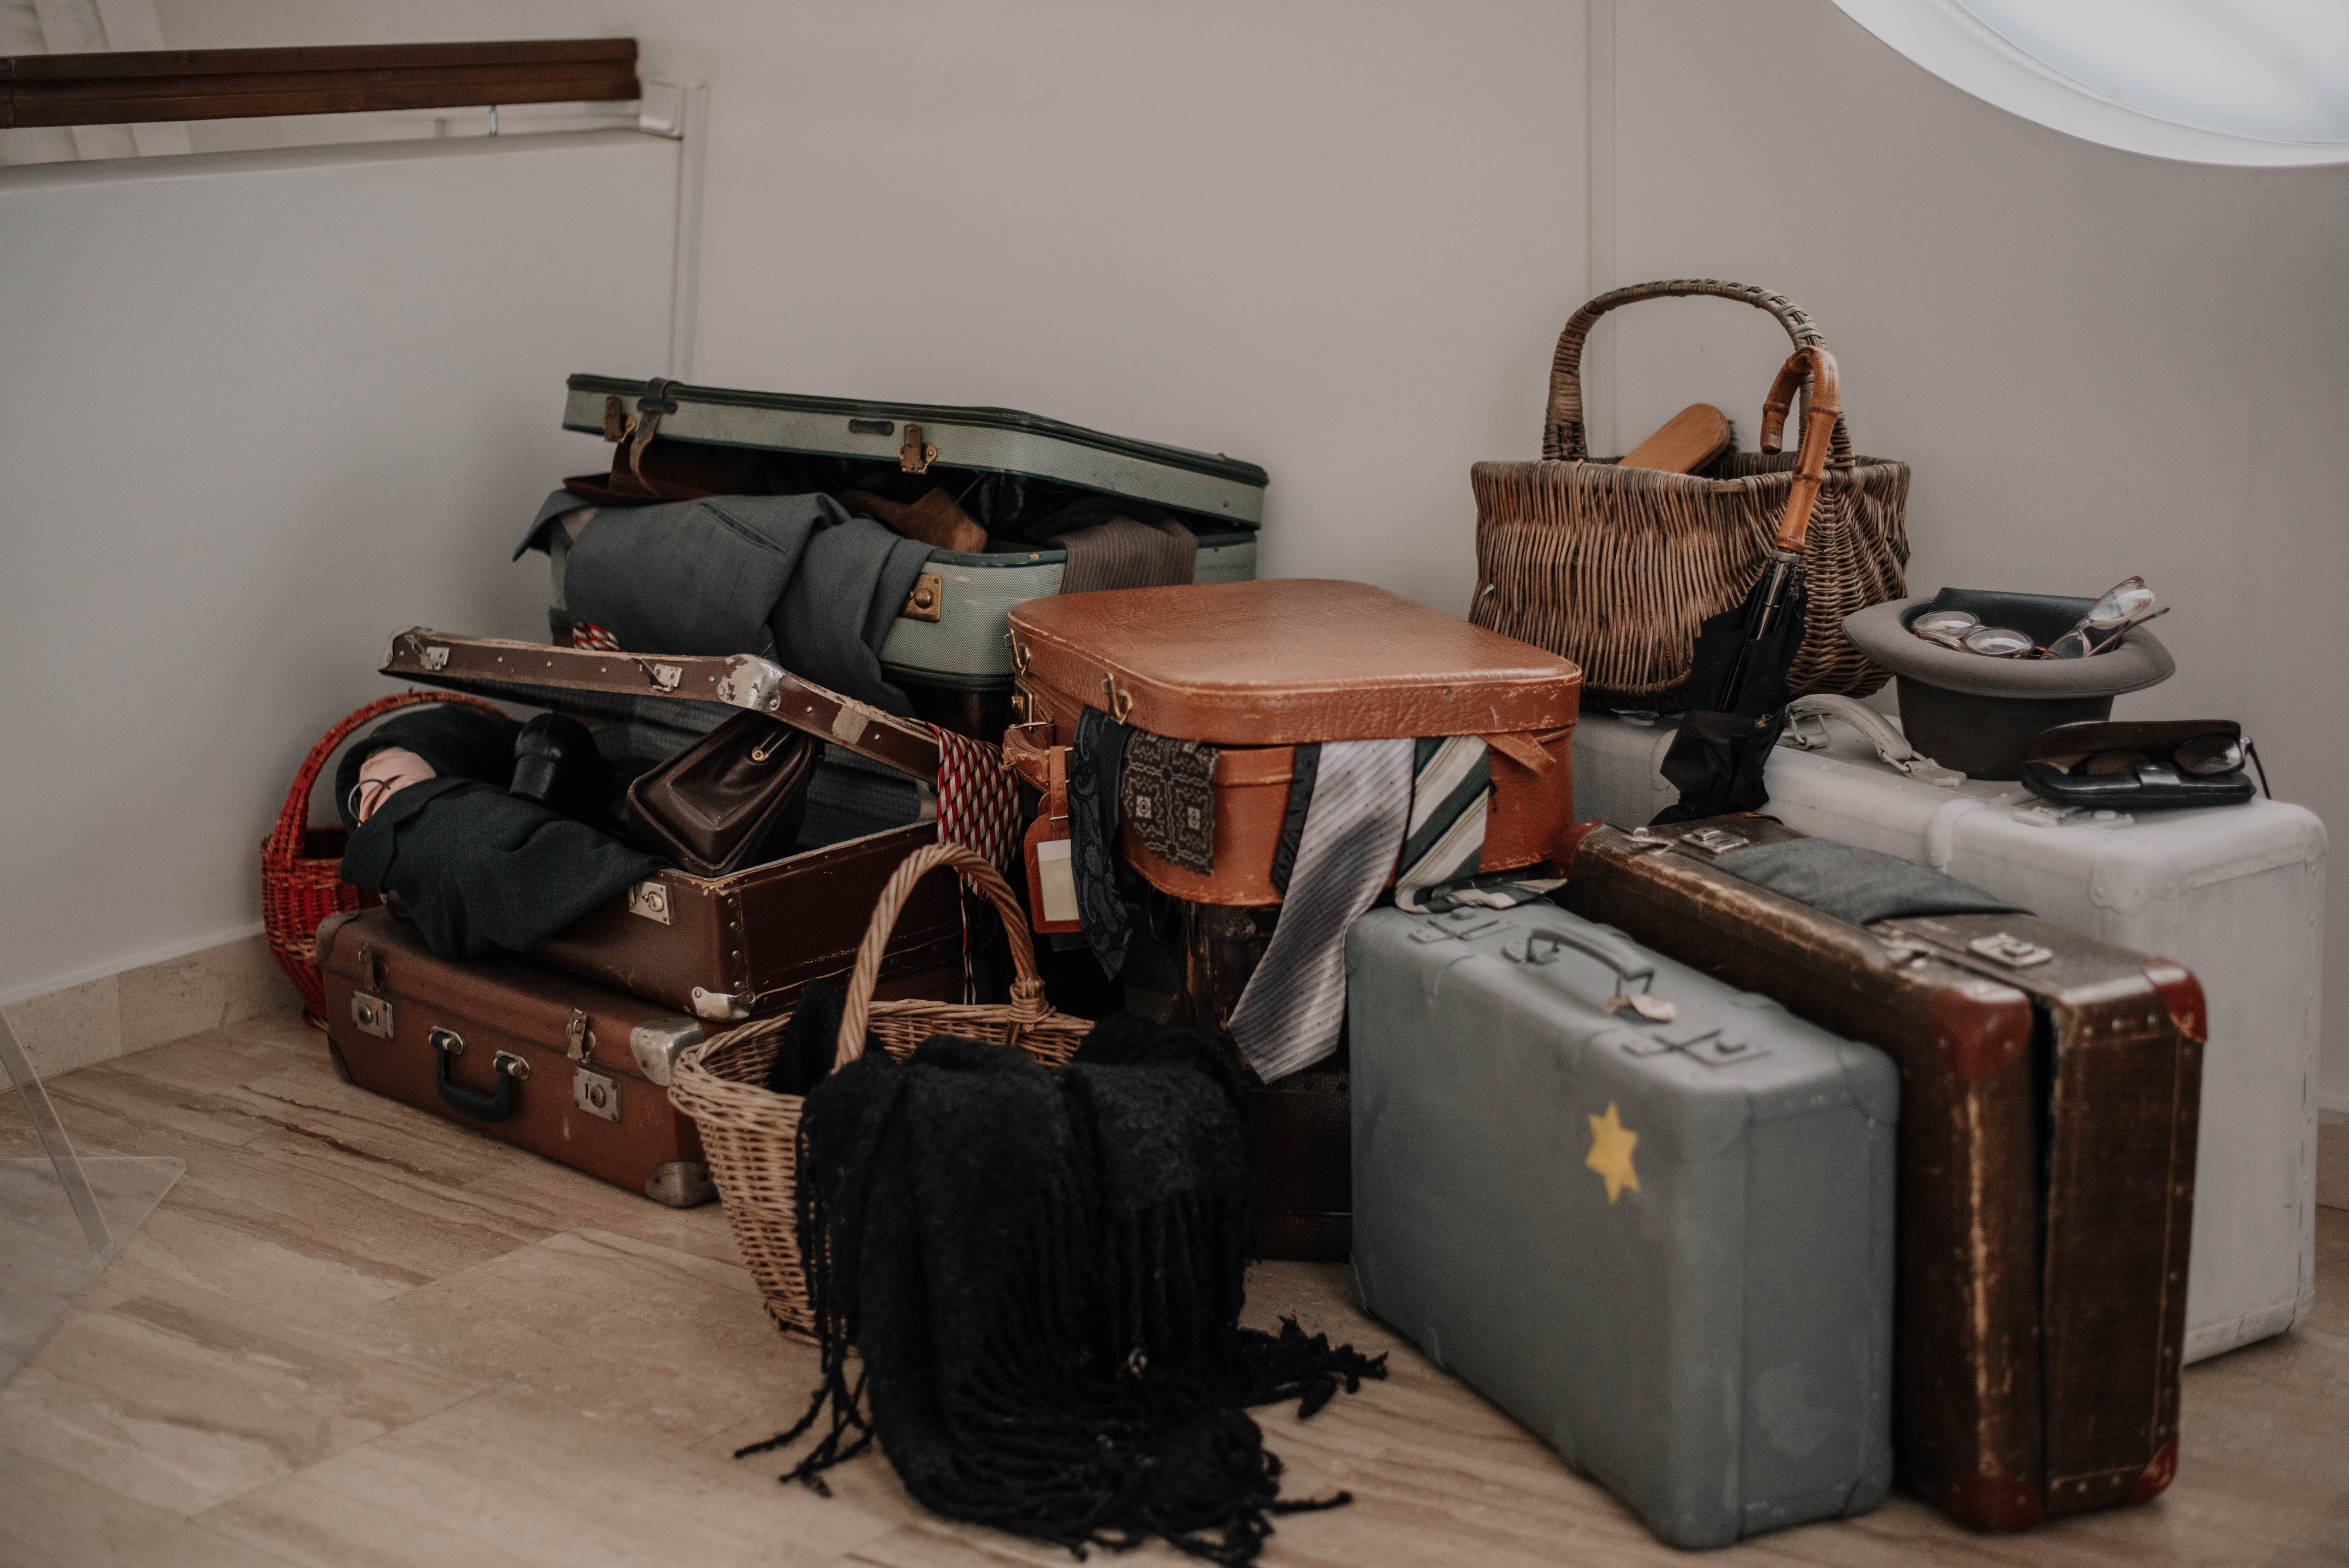 How To Pack Your Bags Smartly